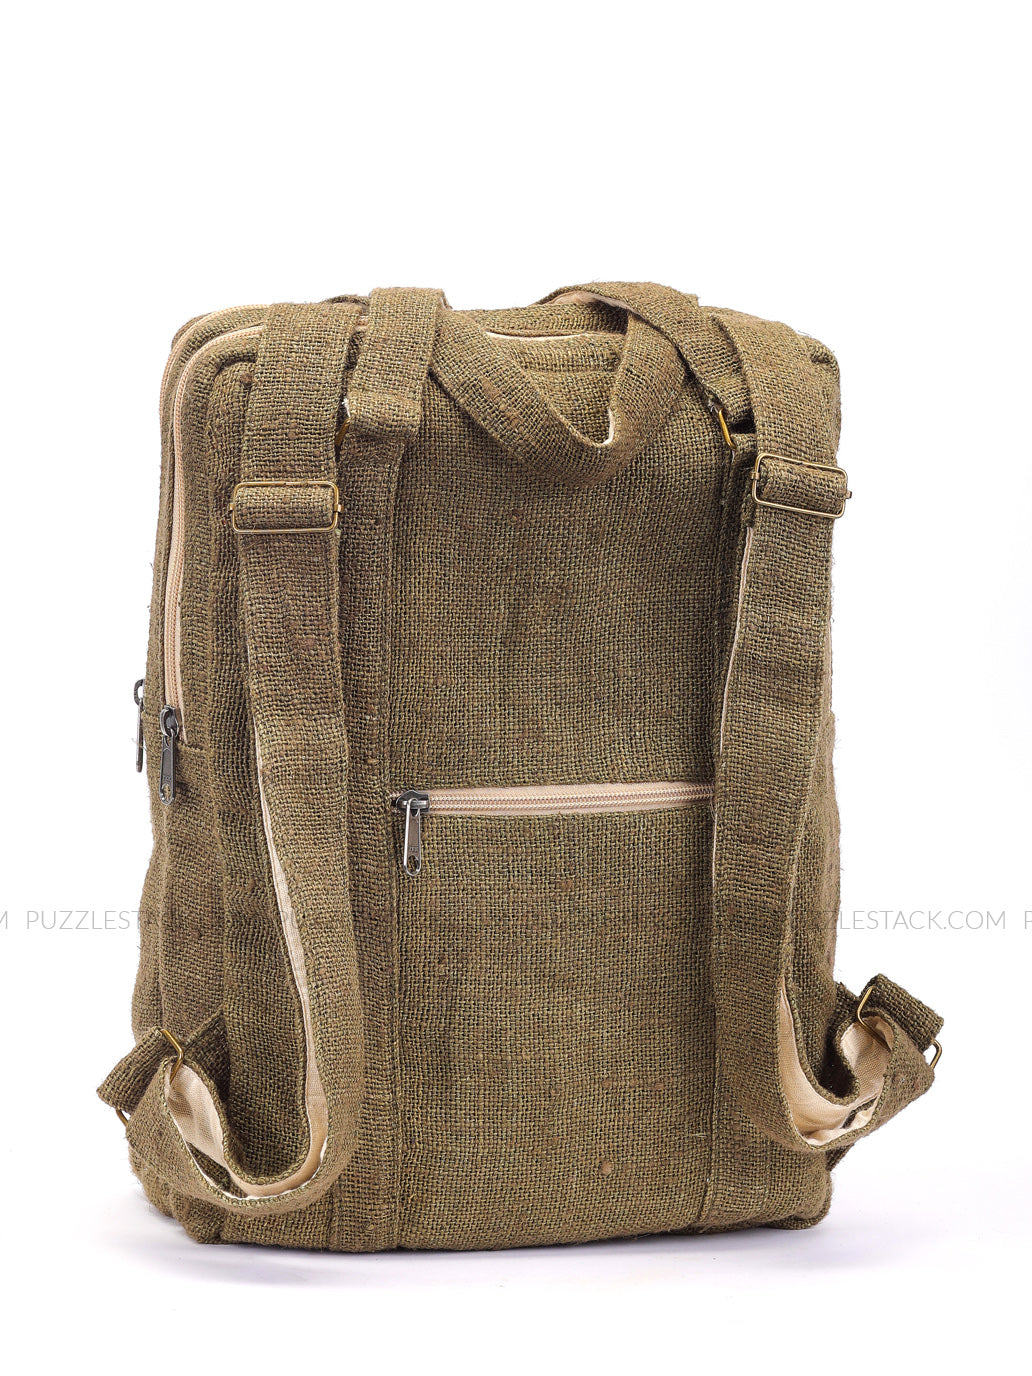 Namche Laptop Backpack